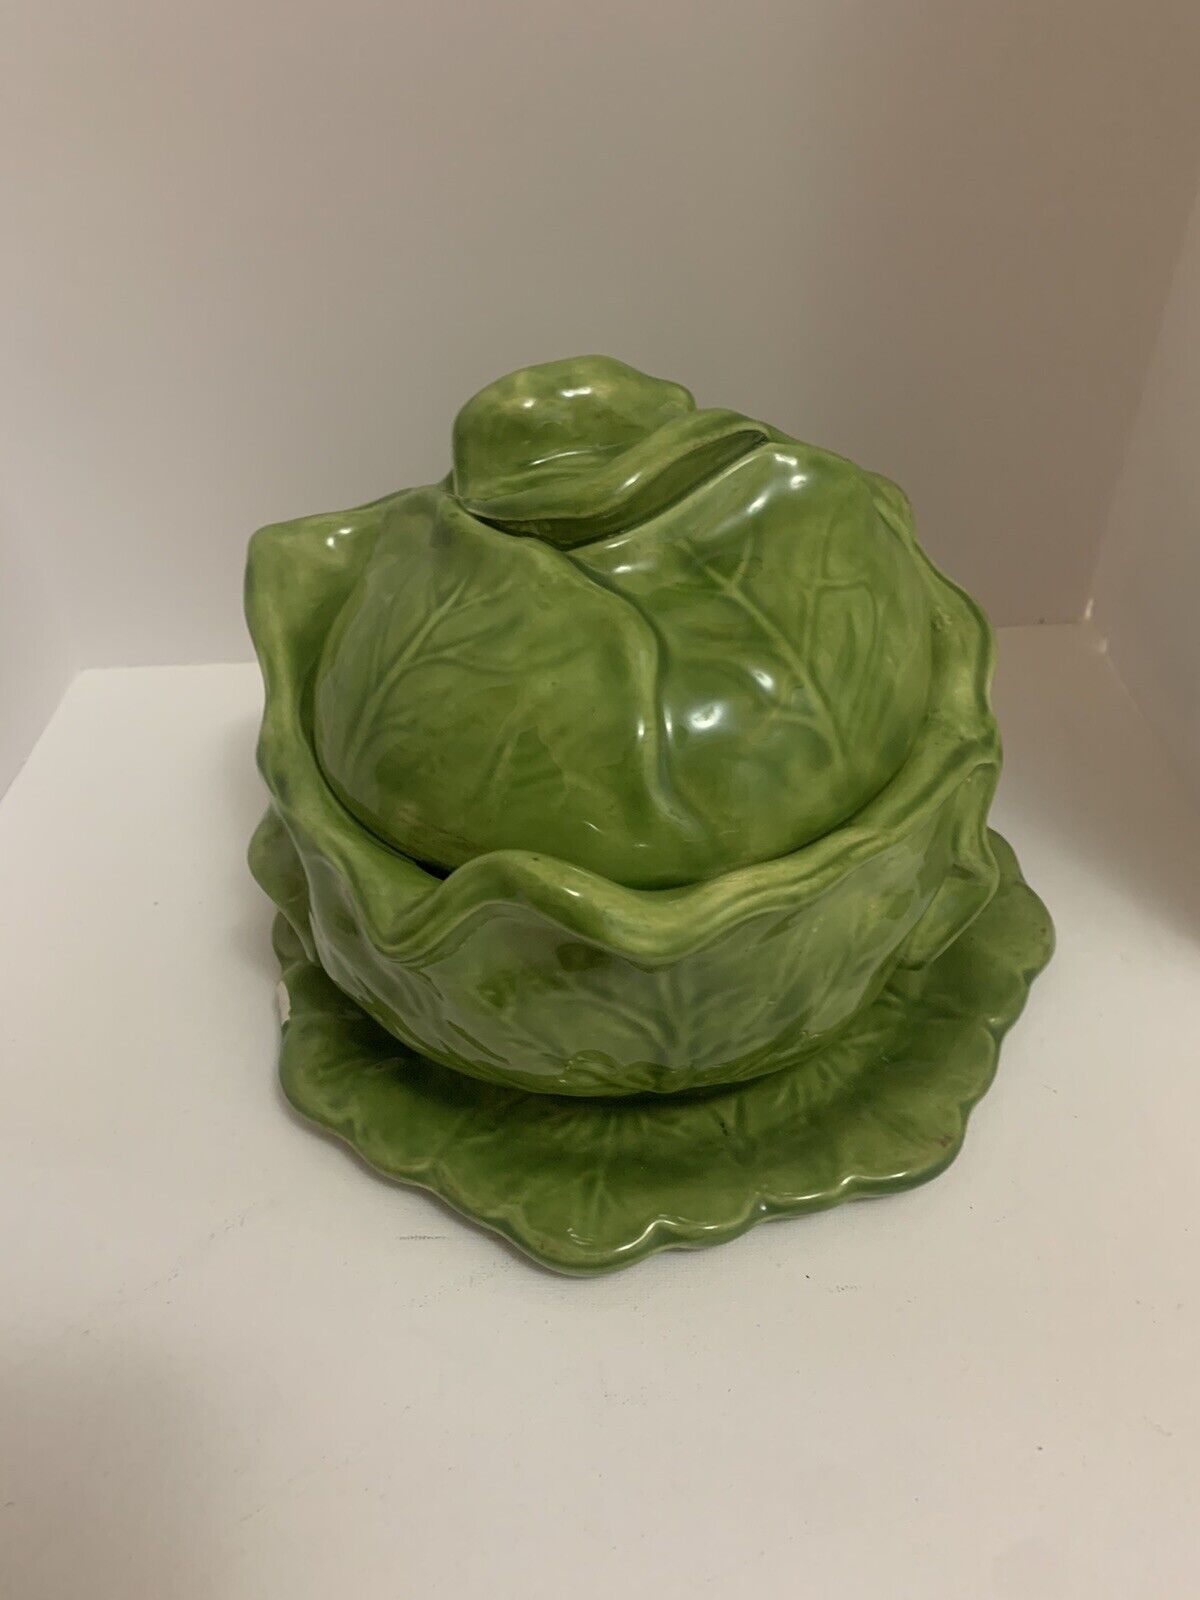 Vintage 1971 Holland Mold Green Cabbage Shaped Tureen with Bowls